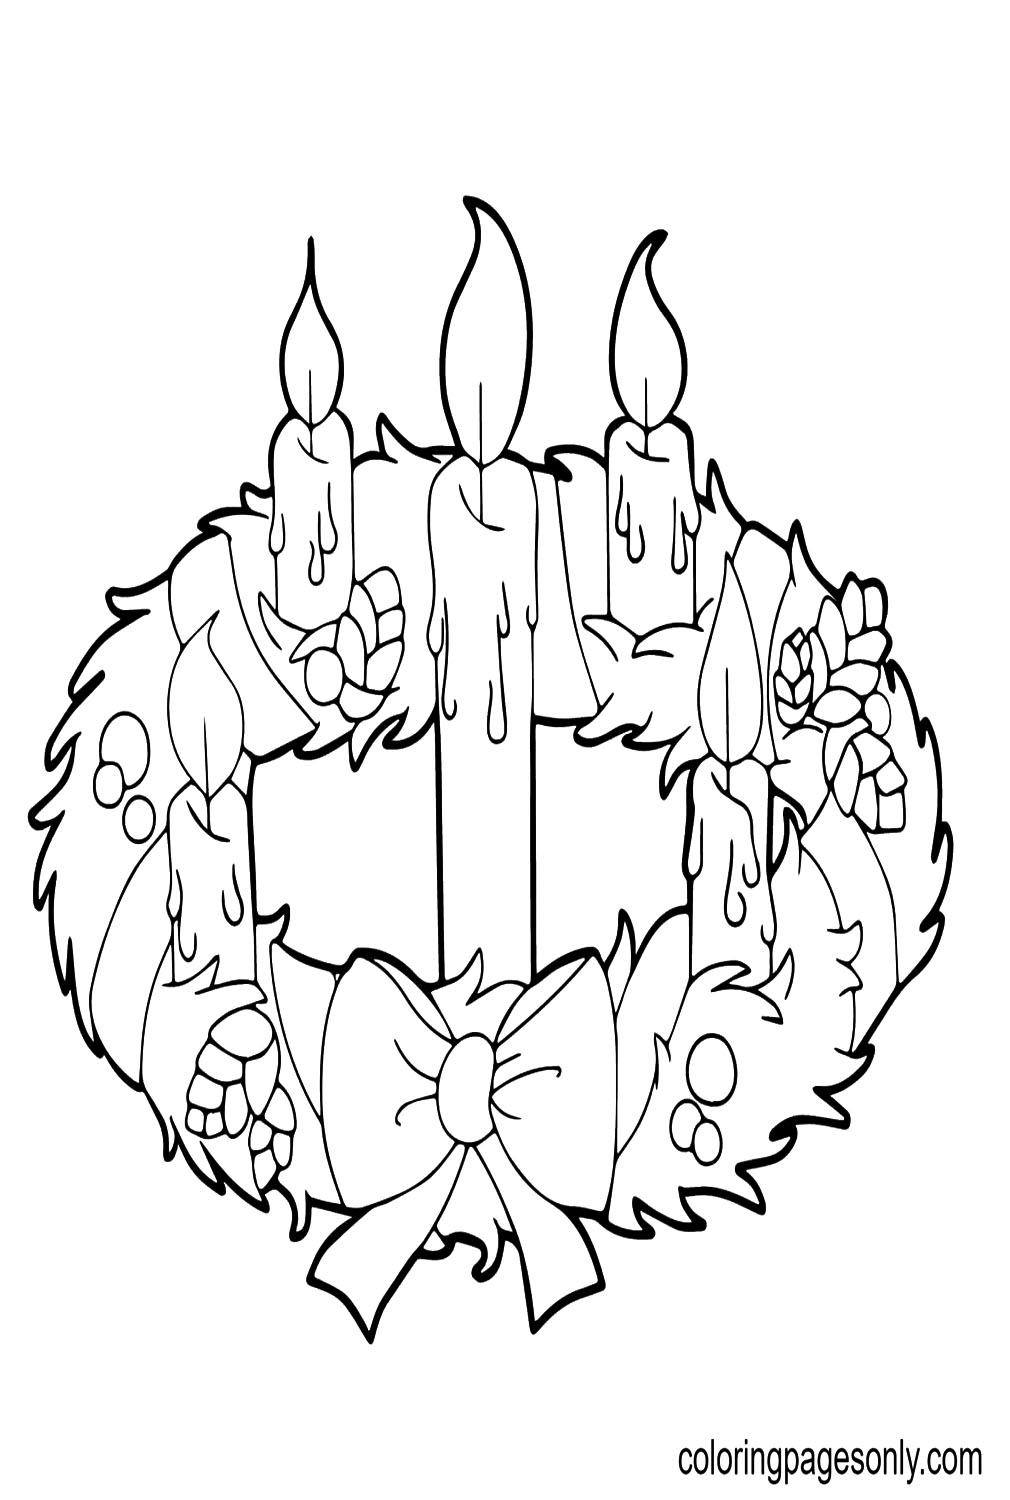 Advent Wreath and Candles Coloring Page - Free Printable Coloring Pages